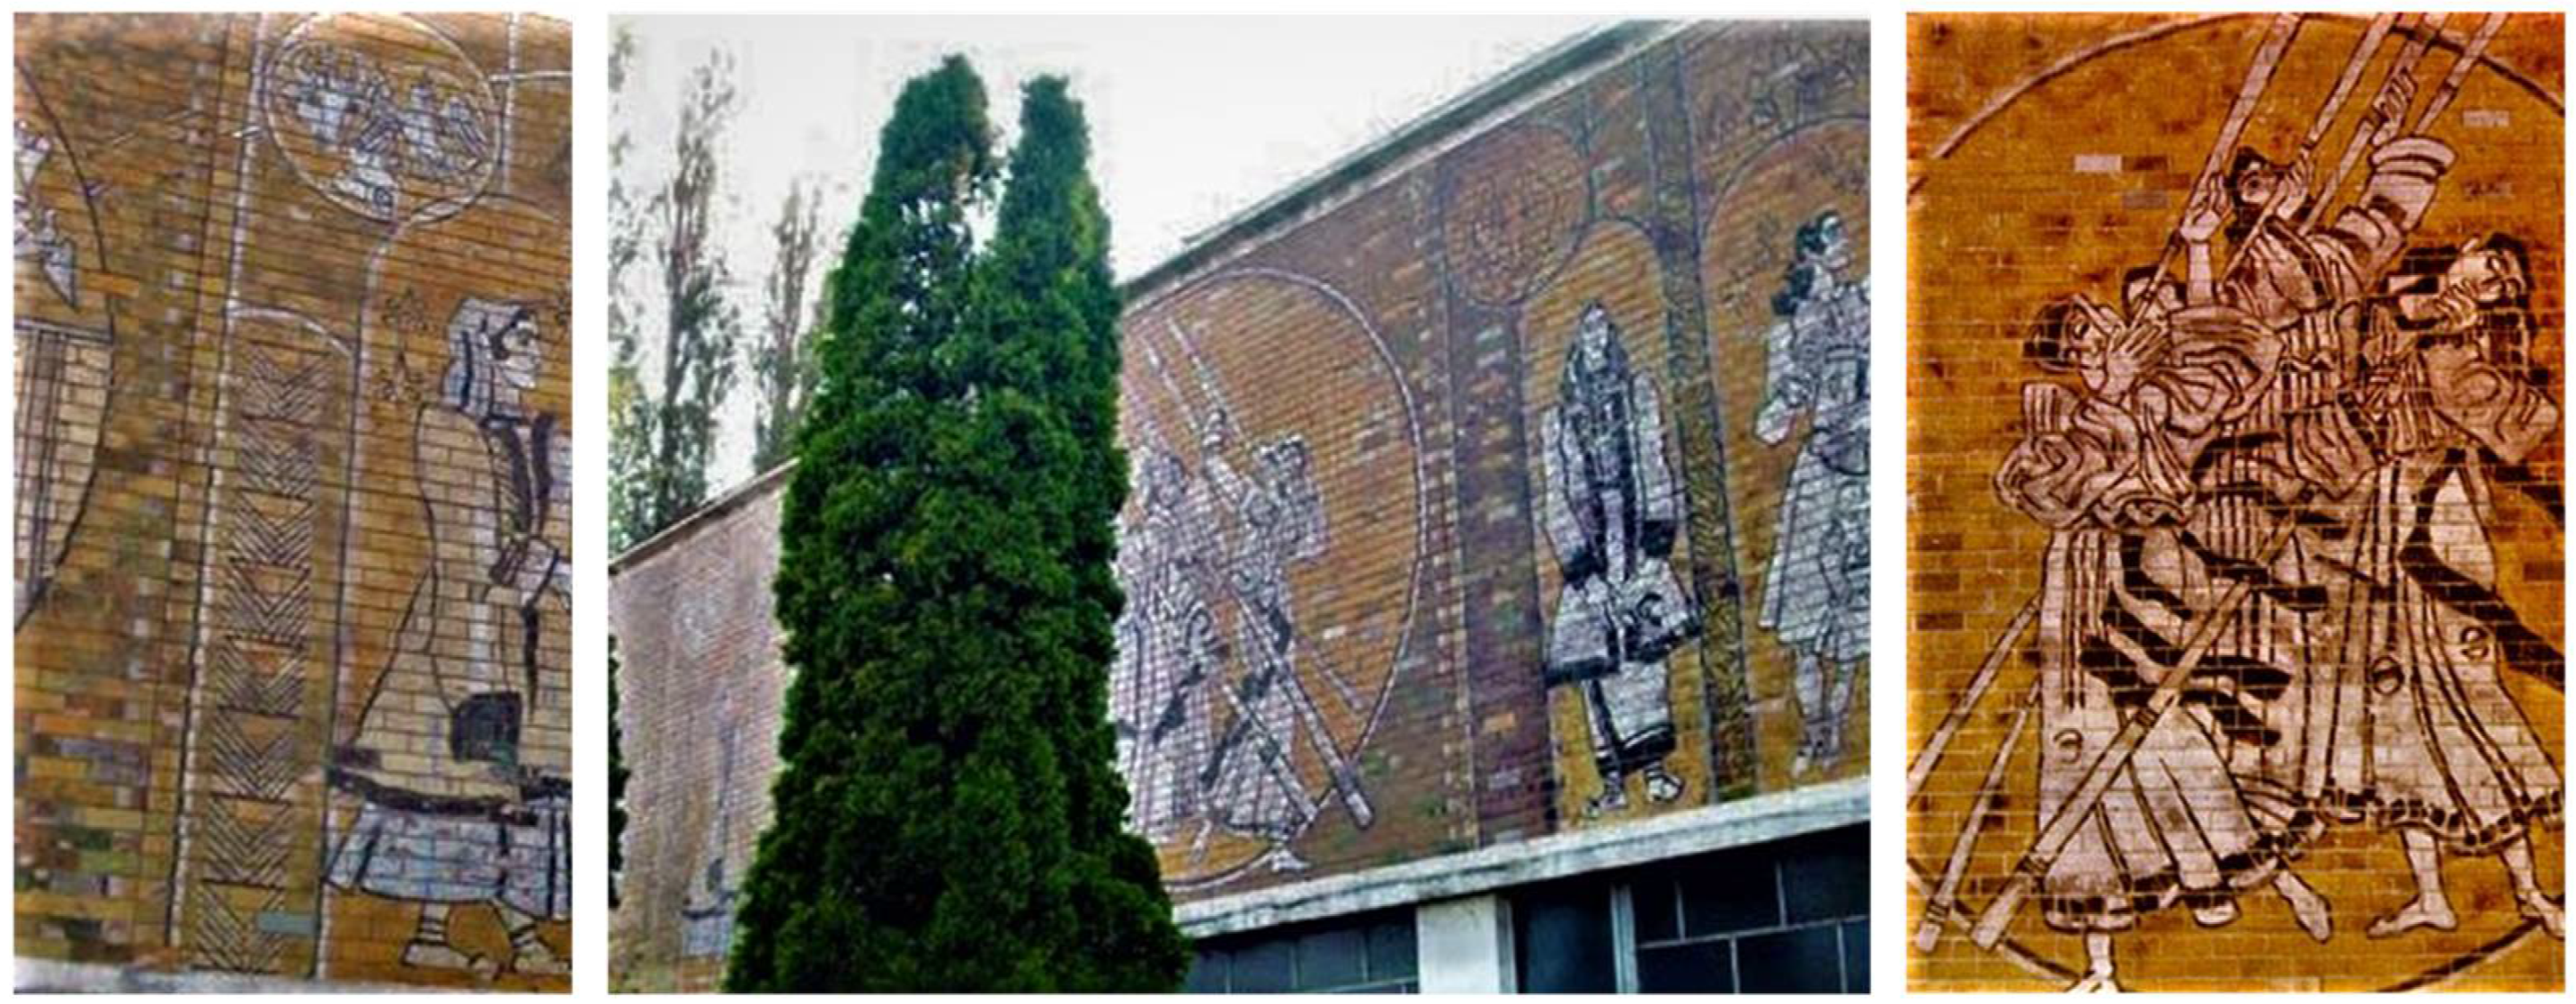 Societies | Free Full-Text | &ldquo;From Beautification to  Ennobling&rdquo;: The Exterior Mural Mosaics from Suceava of the Socialist  Era | HTML